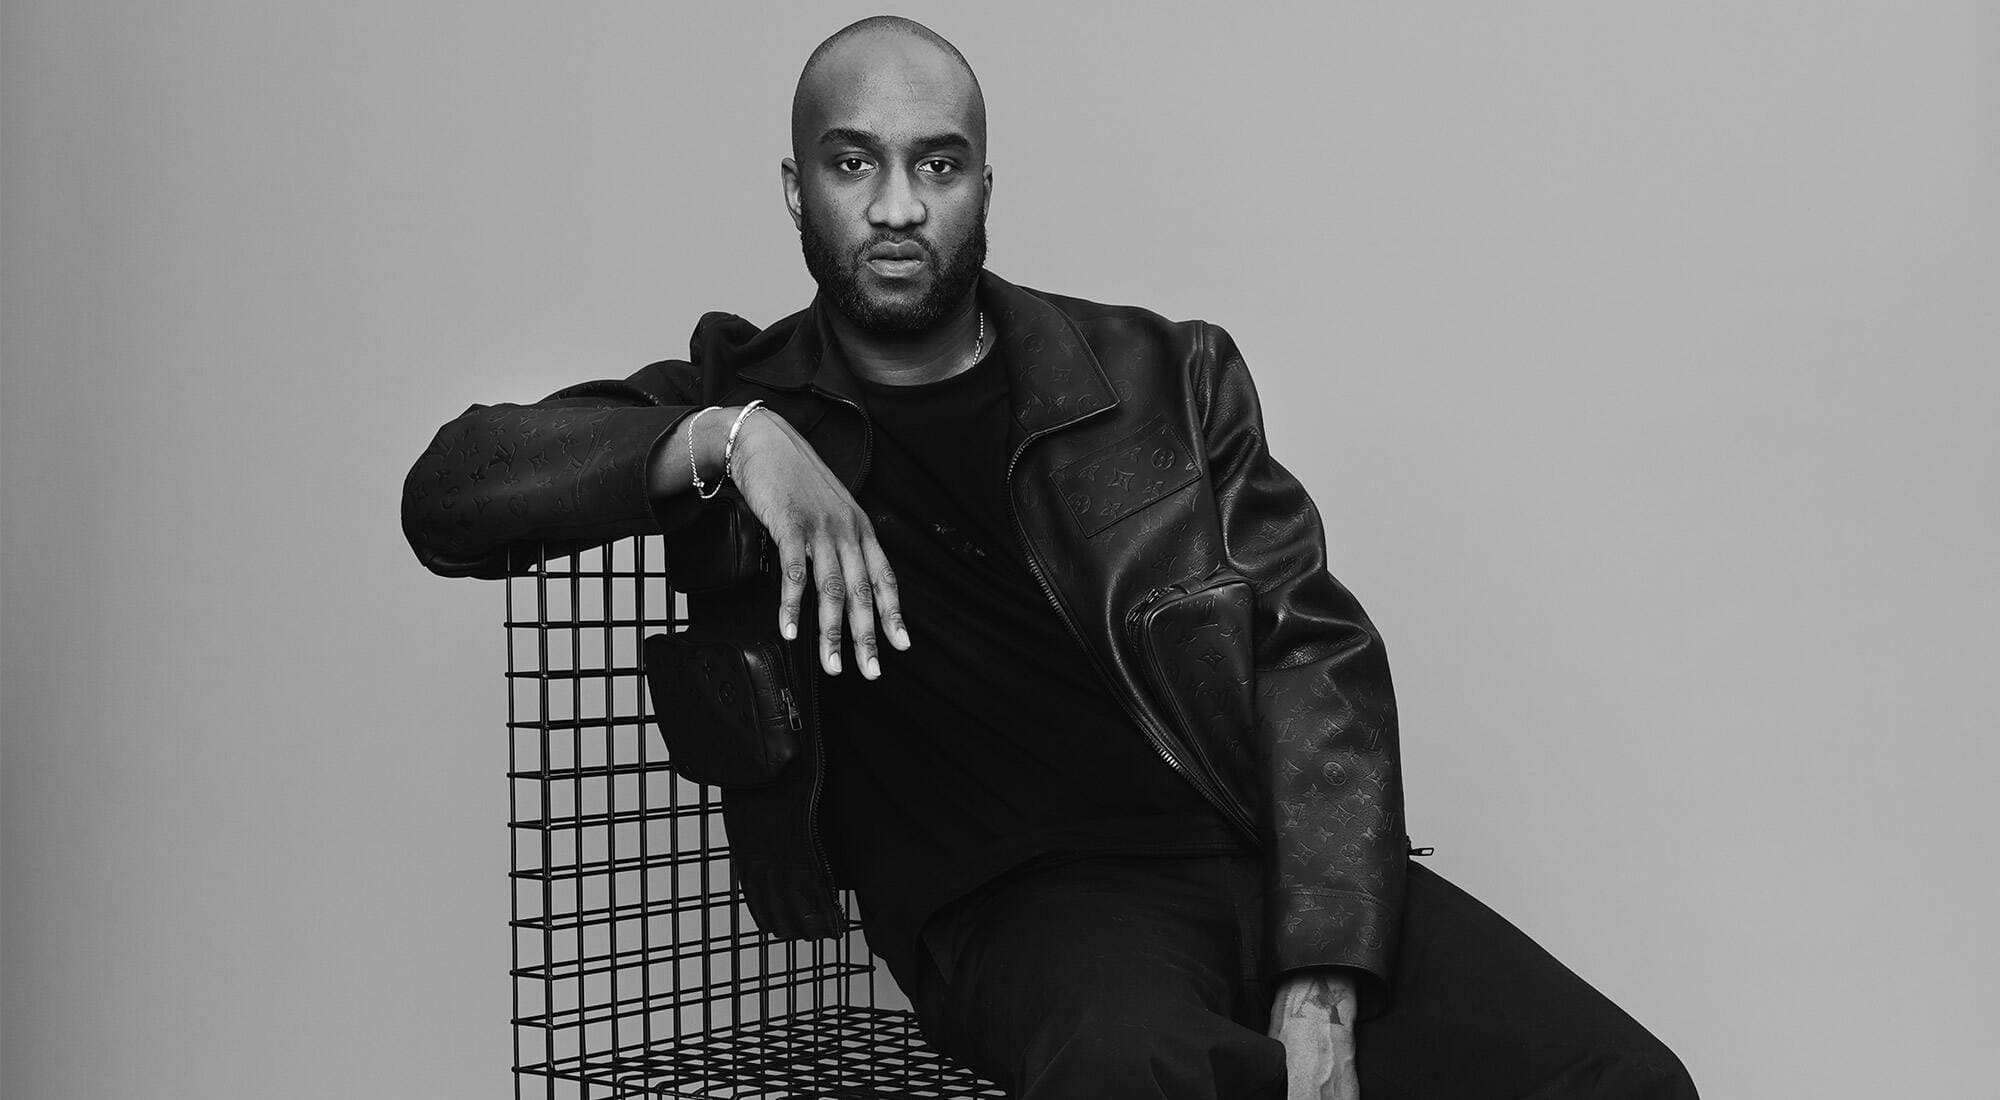 Designer Virgil Abloh Dies After a Private Battle With Cancer at Age 41